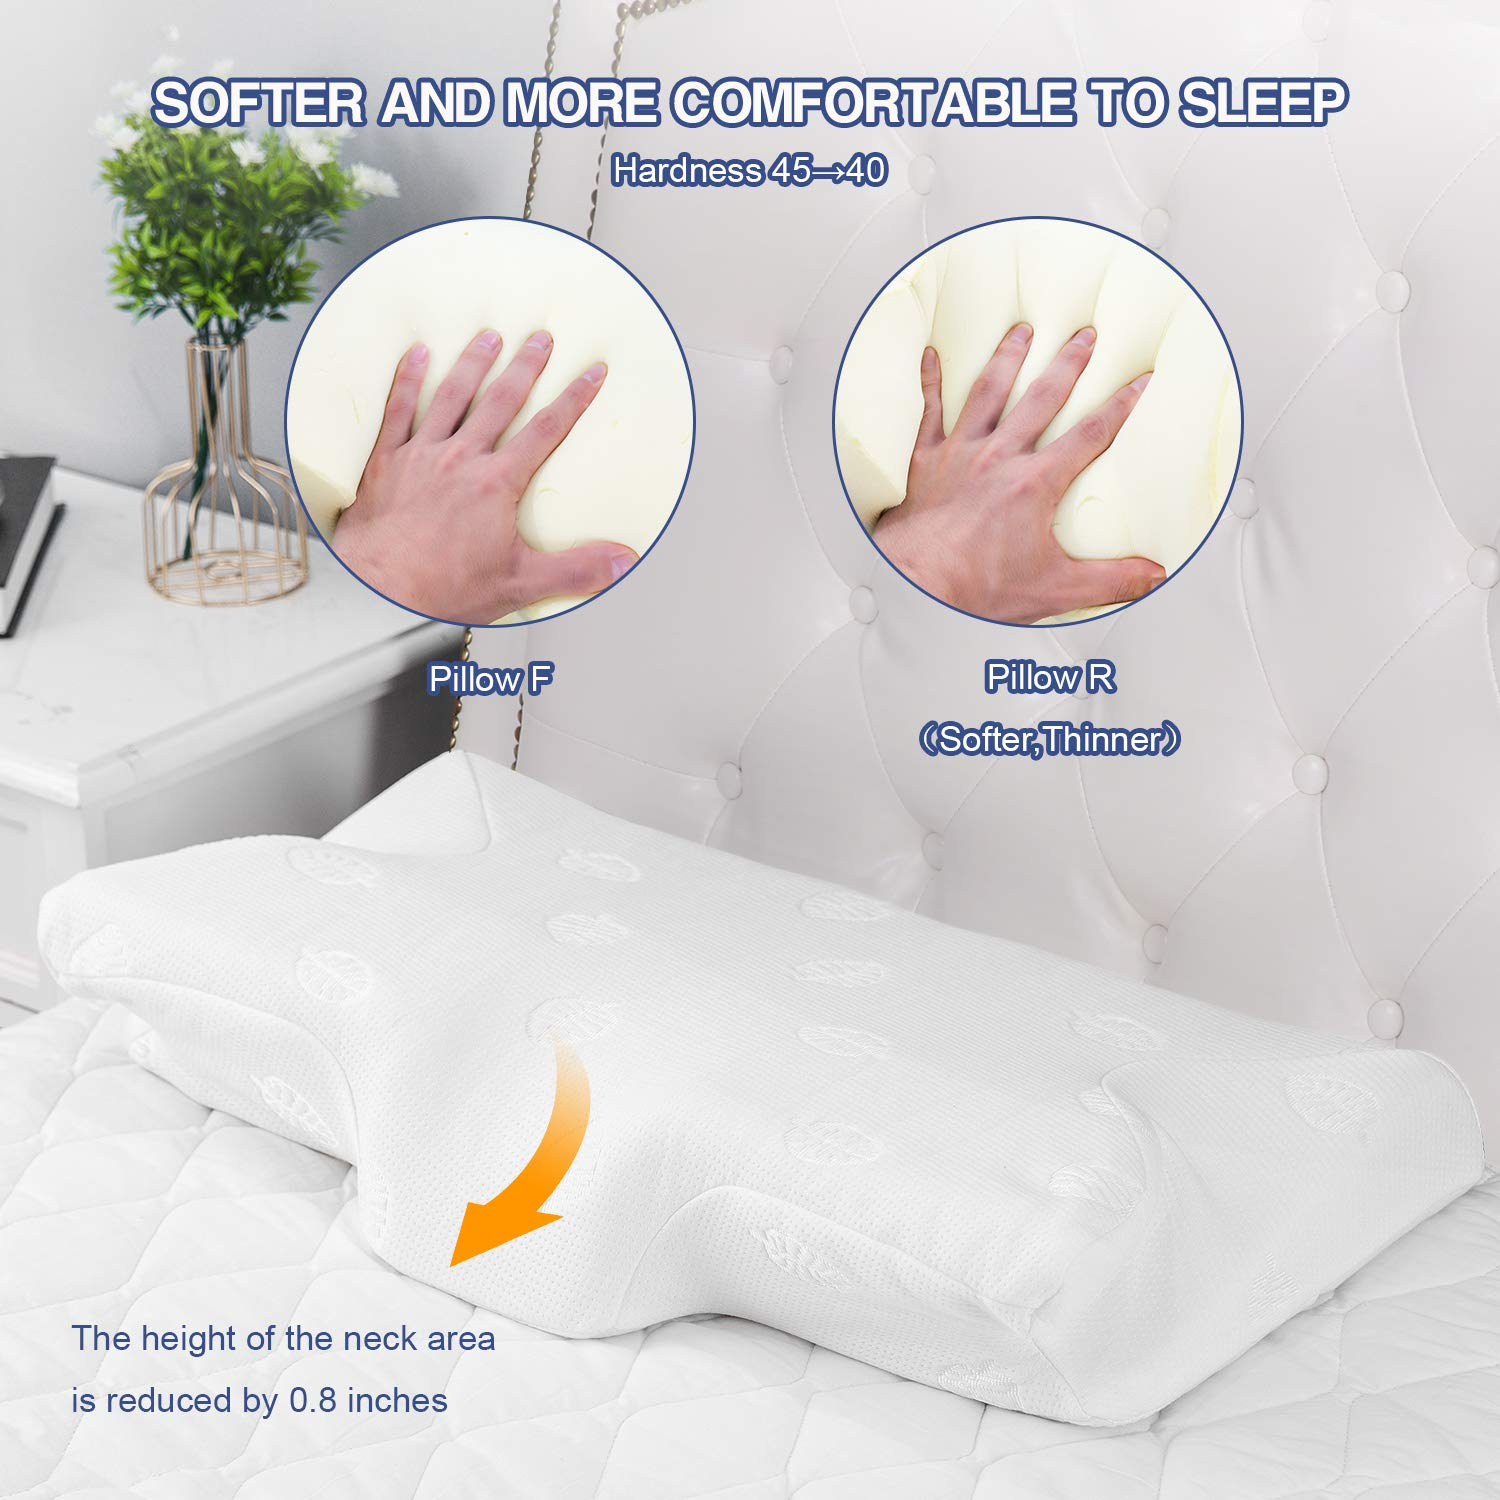 Memory Foam Pillows for Sleeping, Side, Backpain, Stomach Sleepers